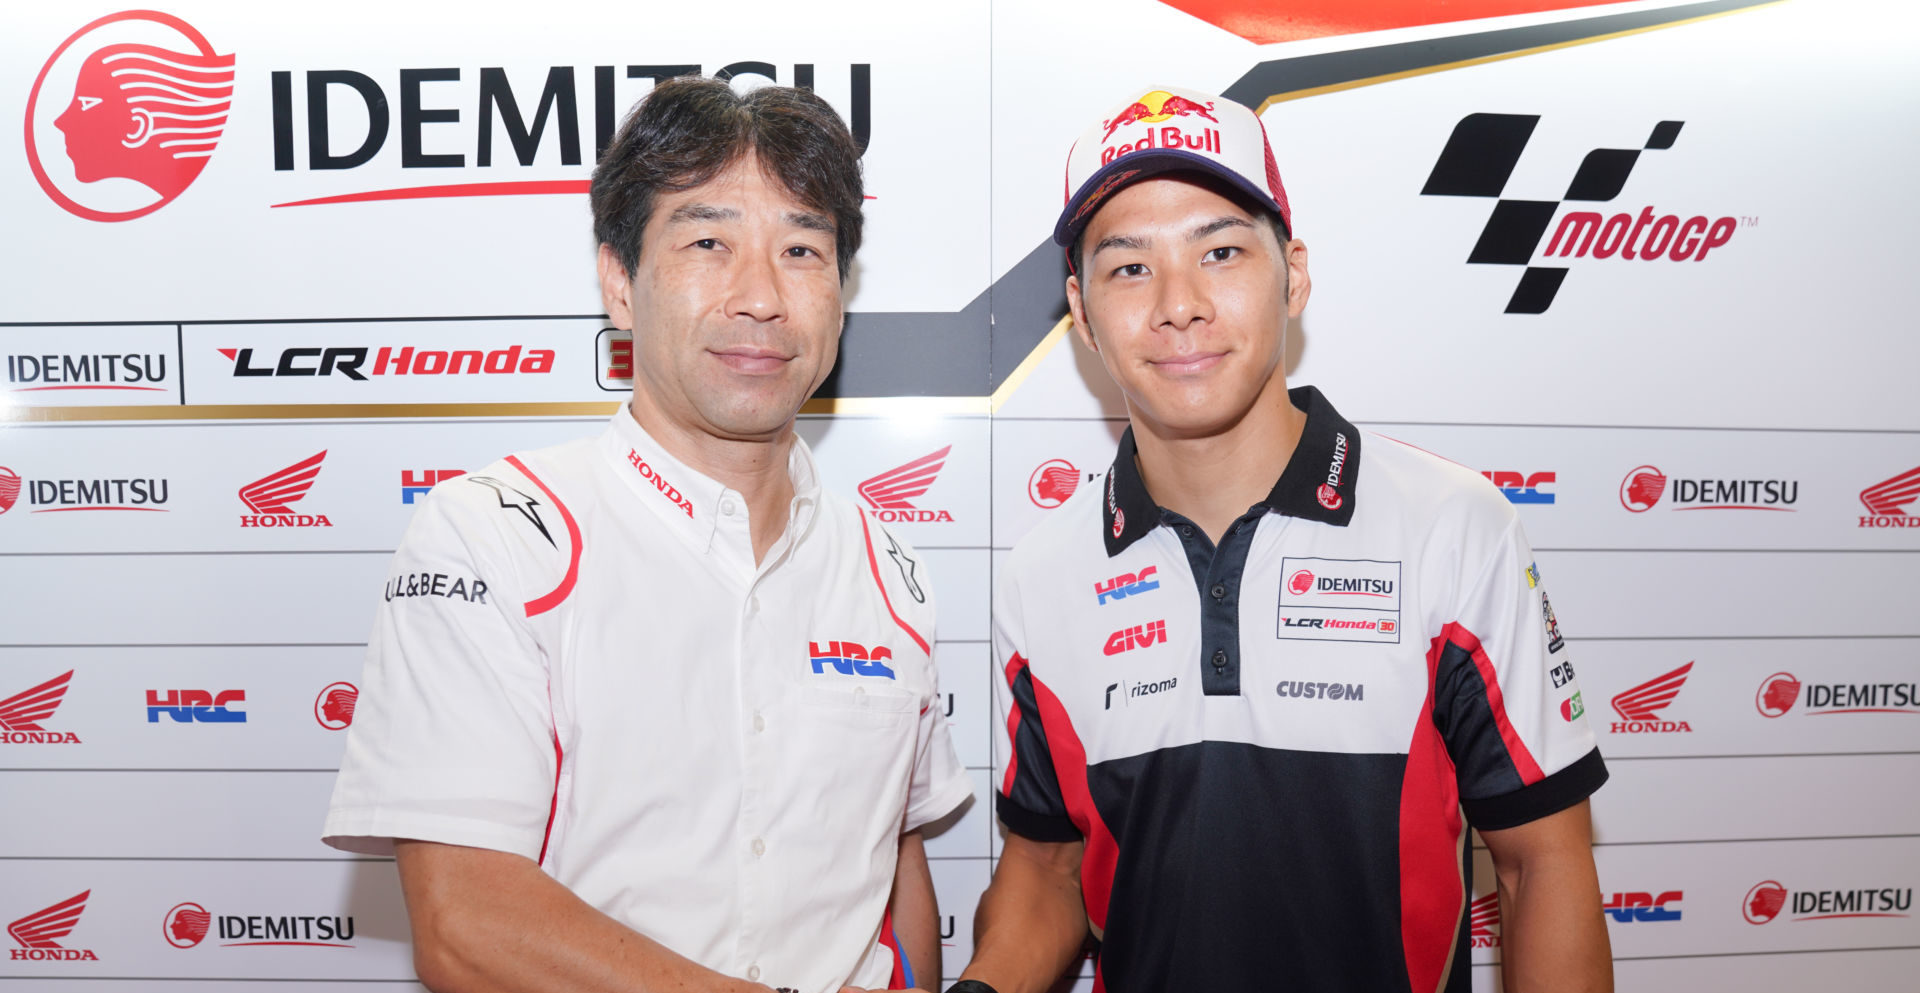 Takaaki Nakagami (right) with Tetsuhiro Kuwata, HRC Director - General Manager Race Operations Management Division (right). Photo courtesy of Honda Racing Corporation (HRC).